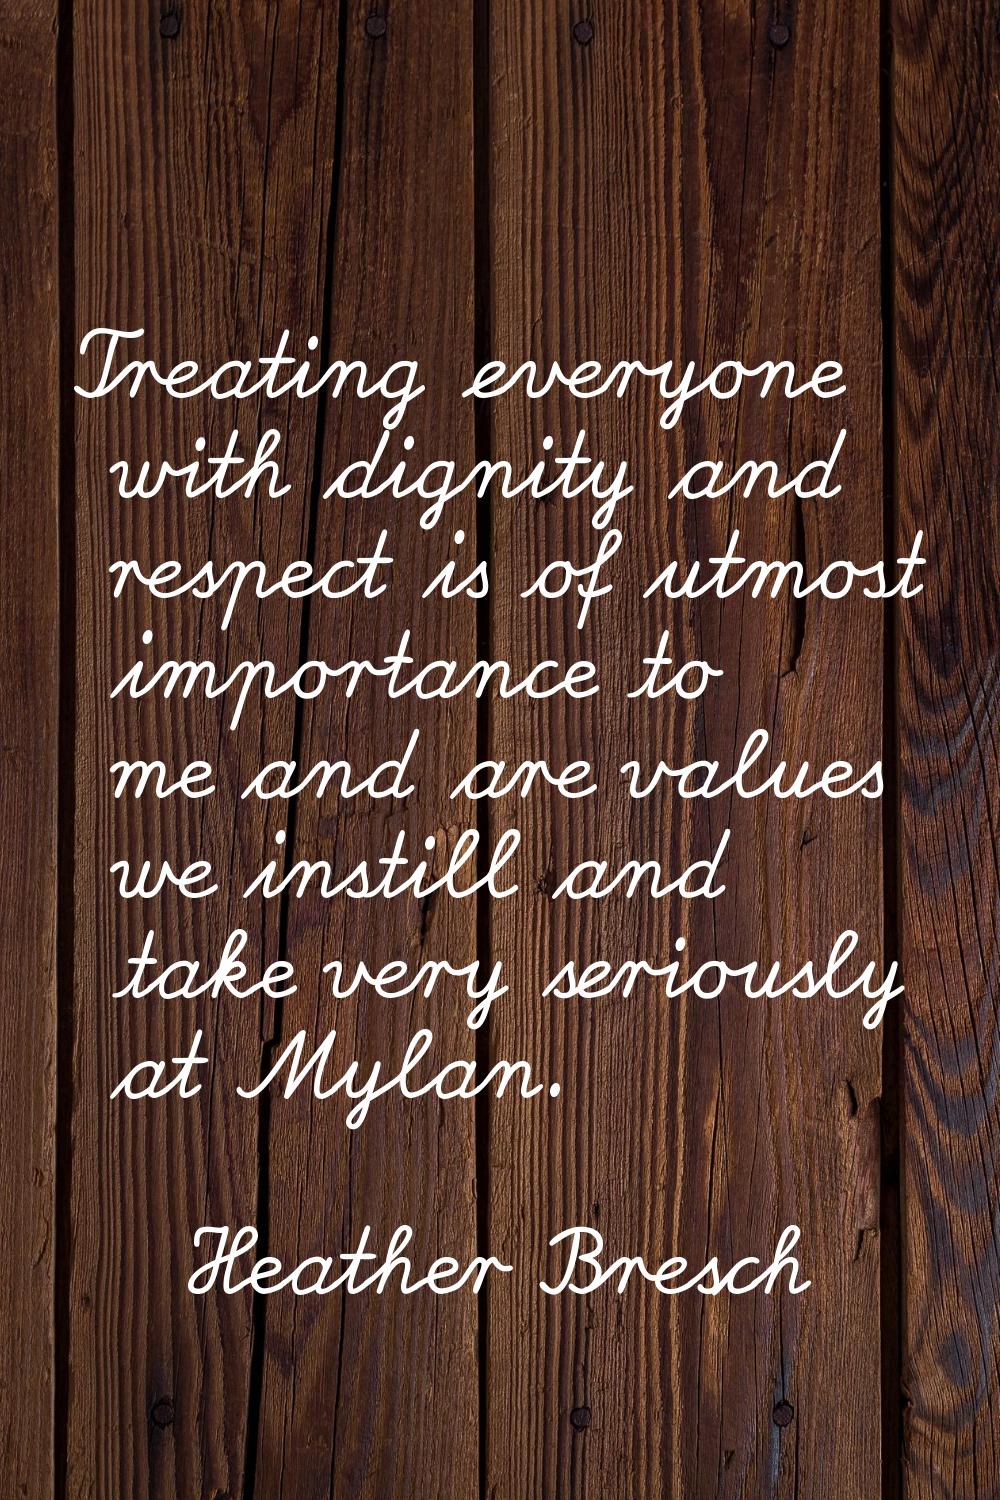 Treating everyone with dignity and respect is of utmost importance to me and are values we instill 